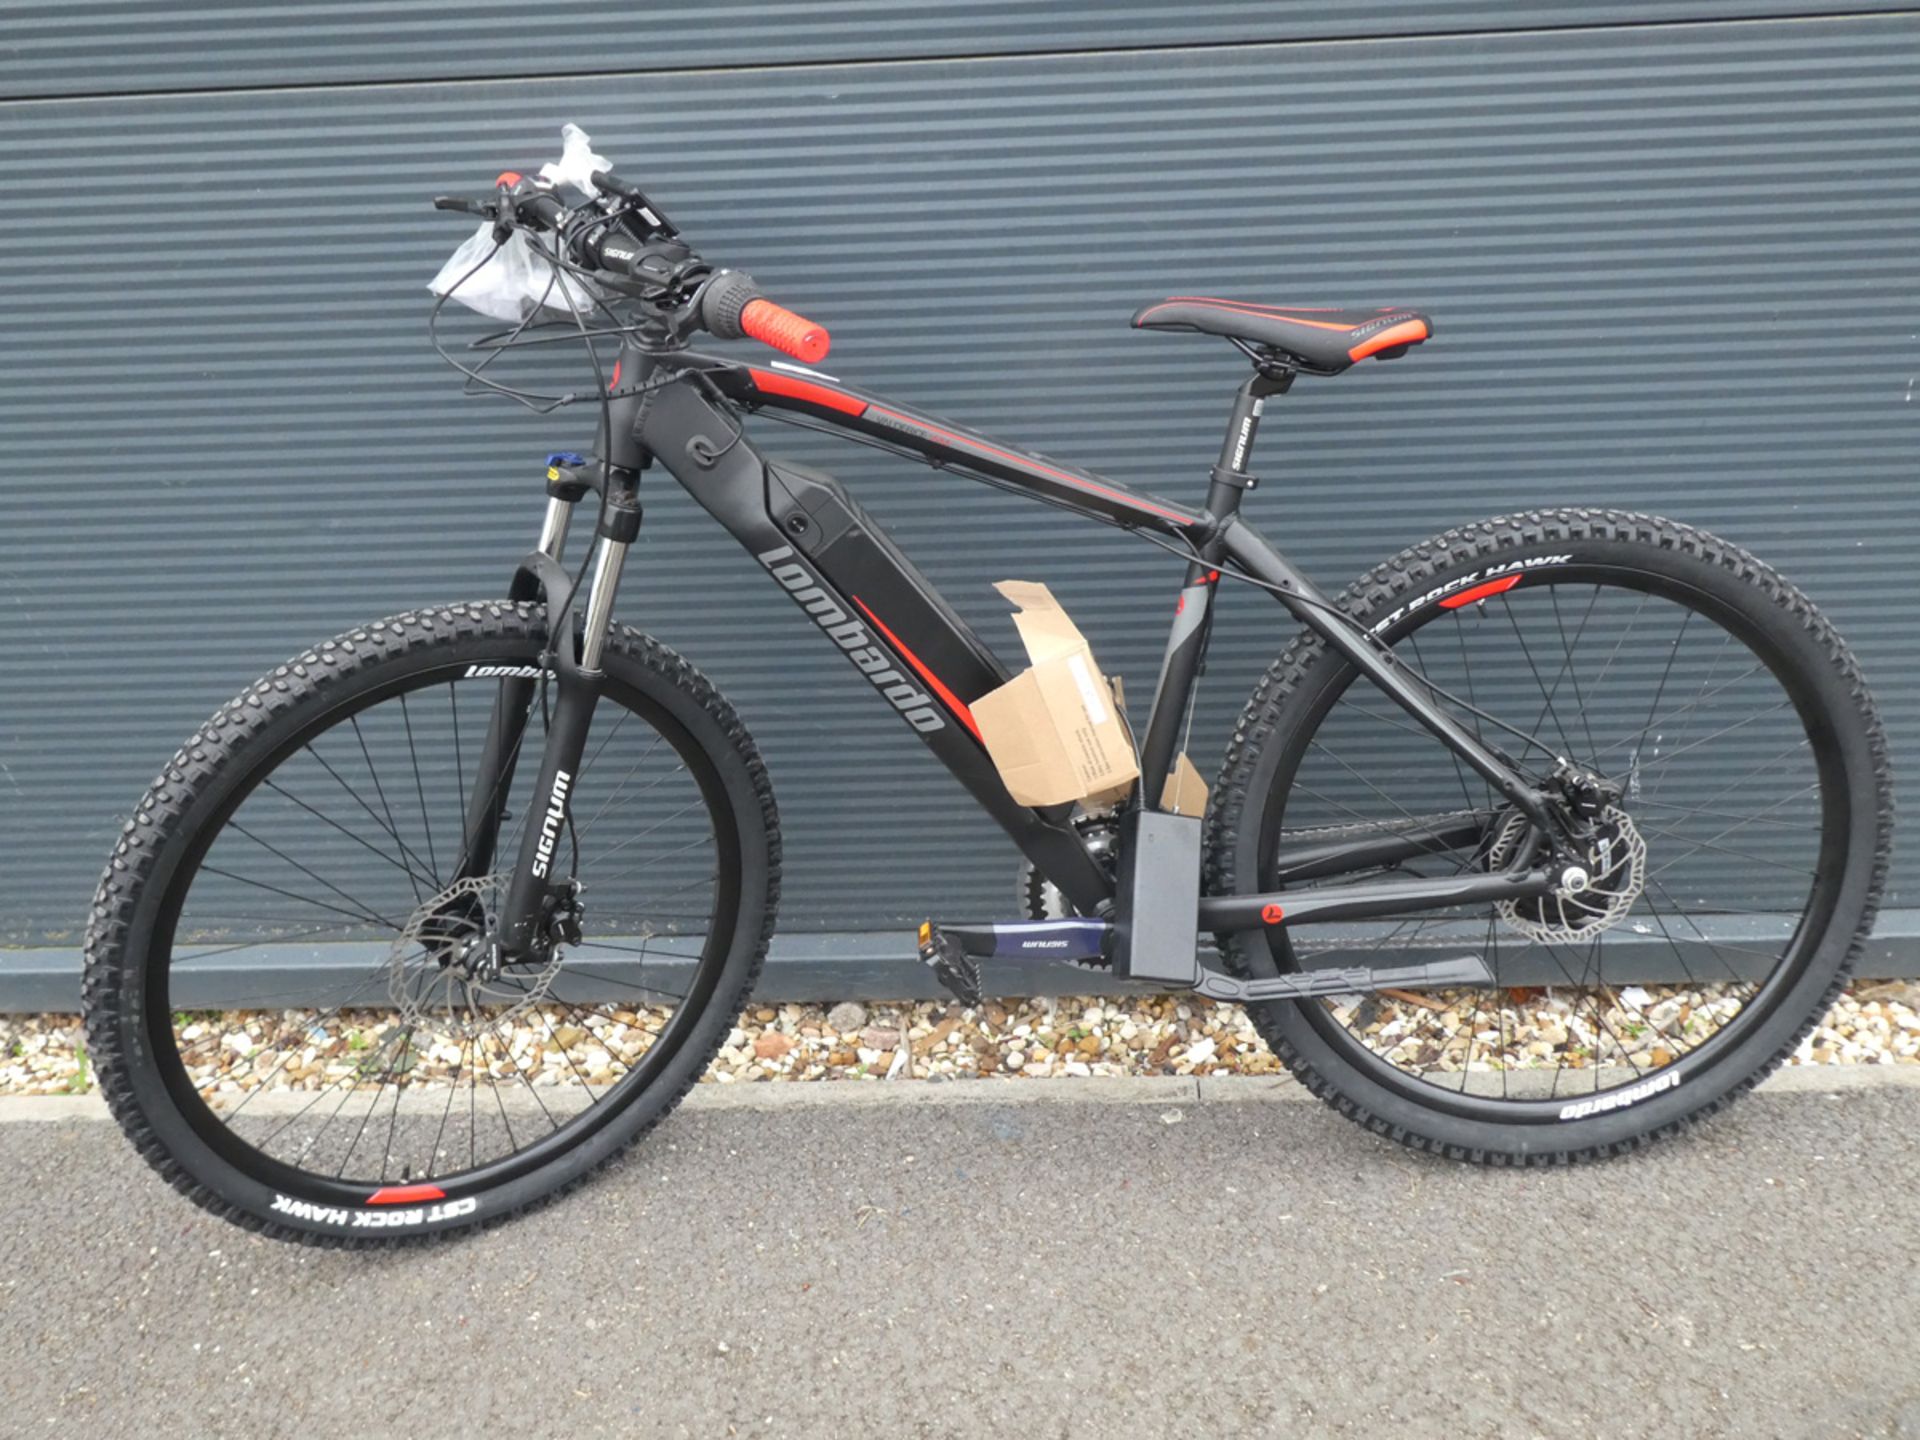 Lombardo electric mountain bike with charger